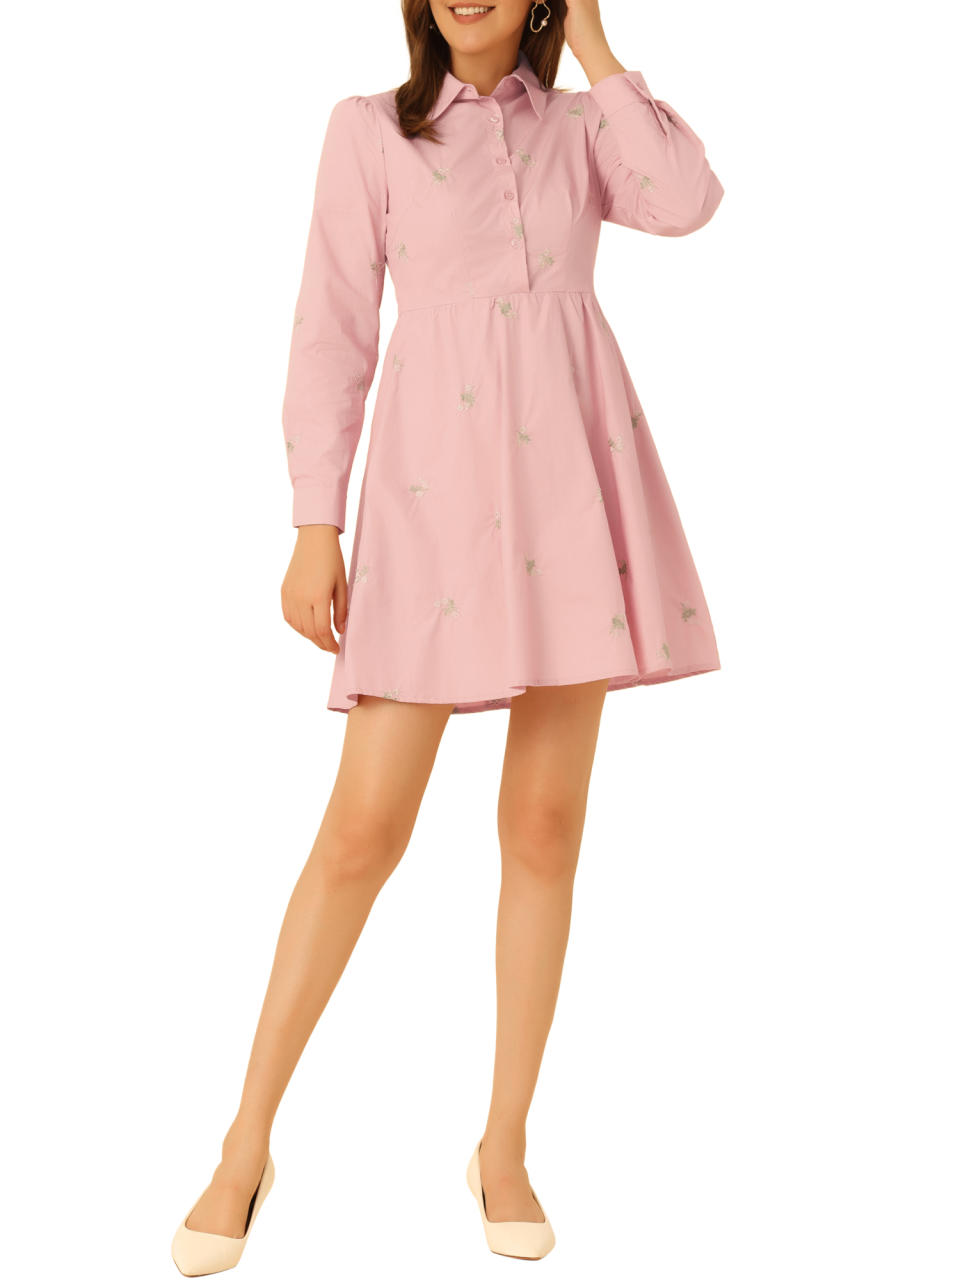 Person in a button-up pink dress with cuffed sleeves and collar, paired with light shoes